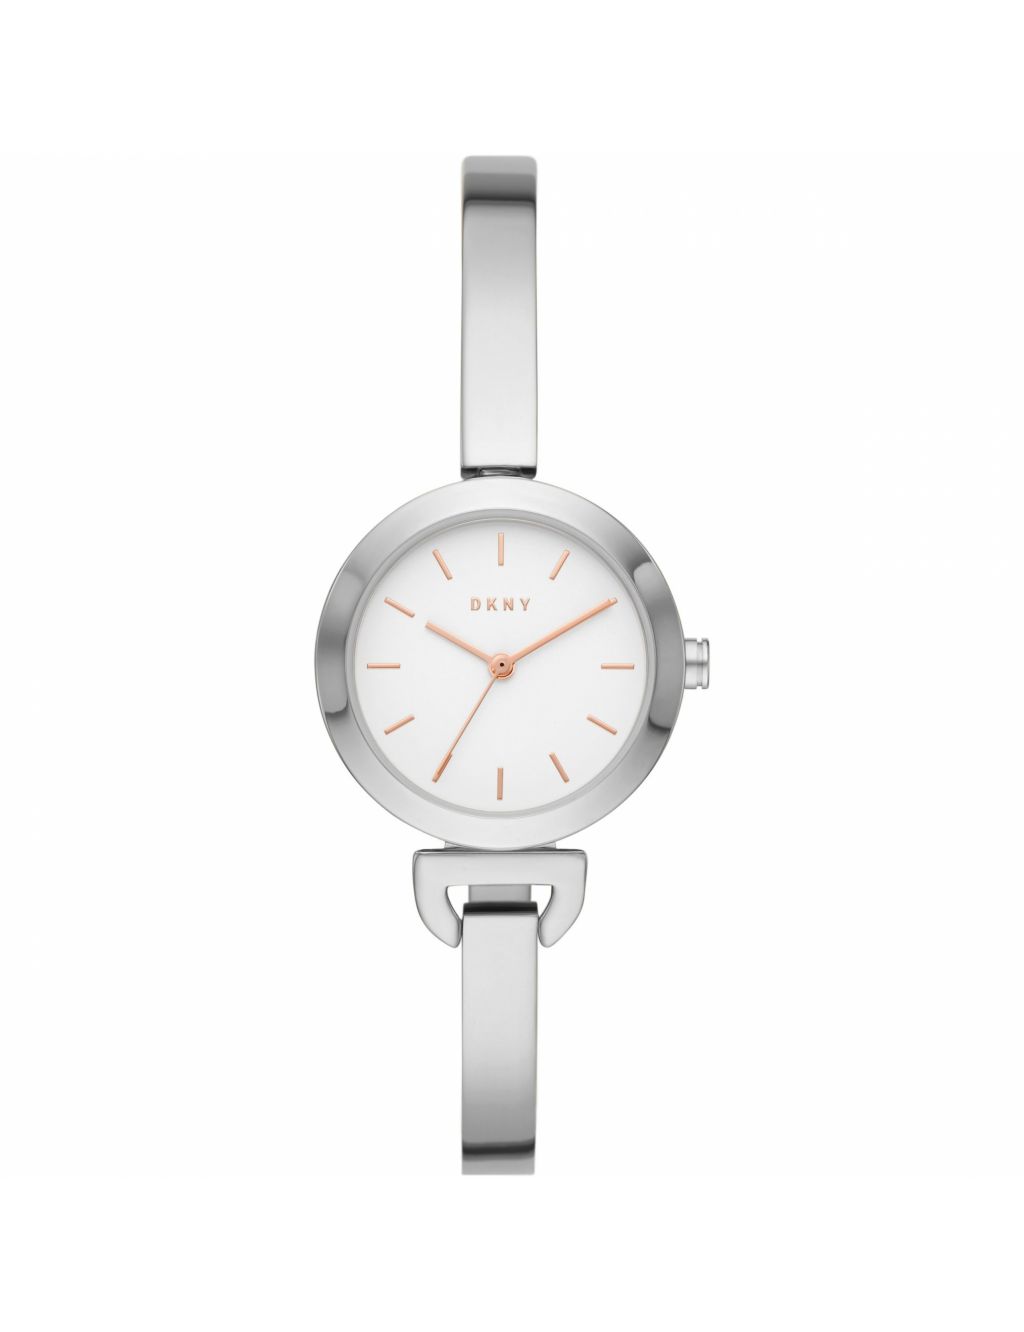 DKNY Uptown Stainless Steel Watch image 1